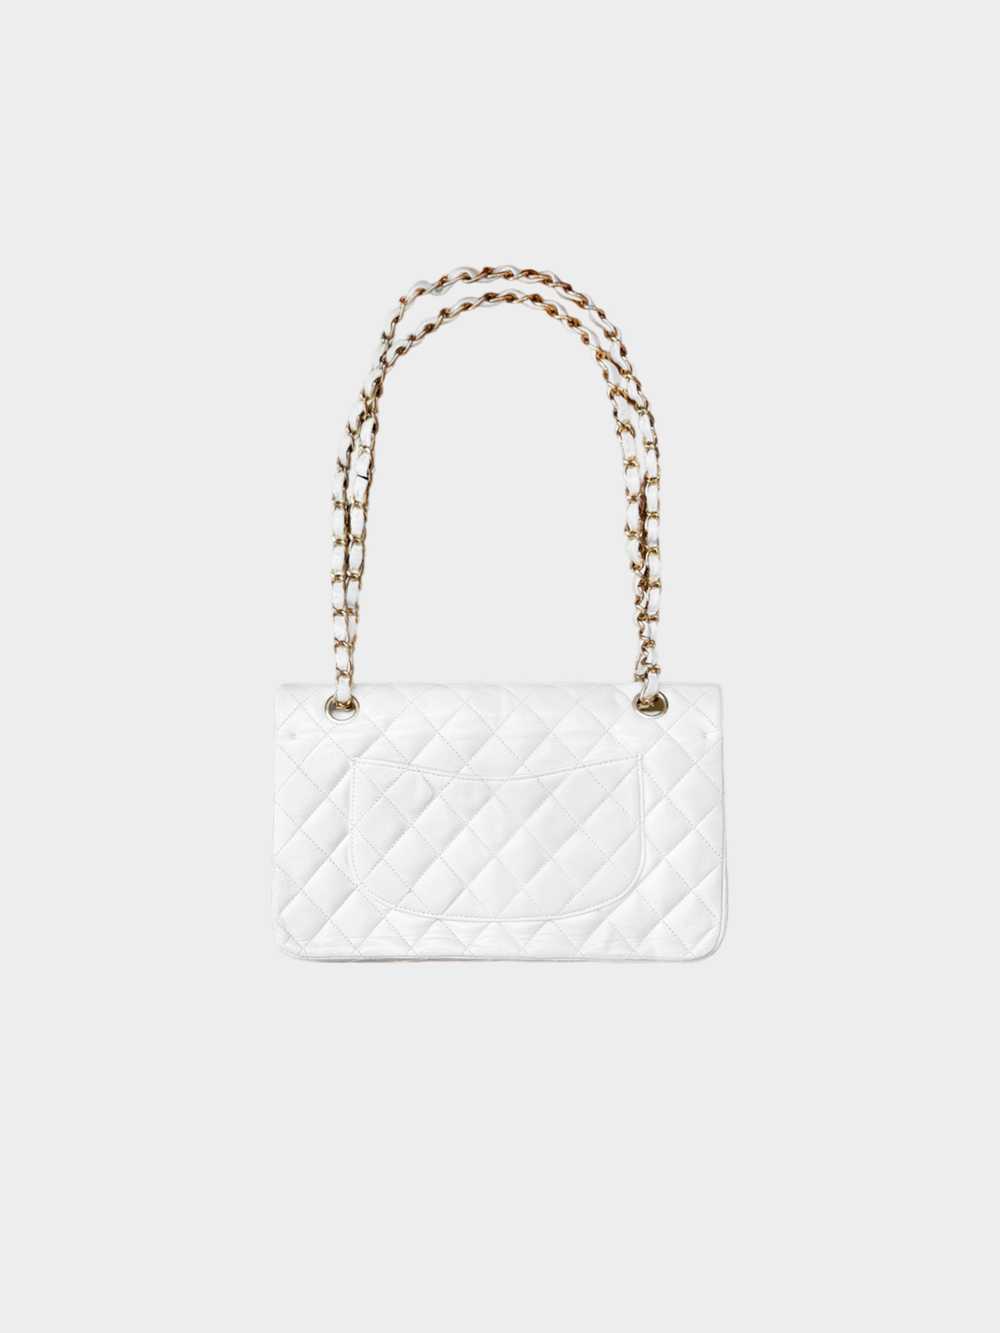 Chanel 2000s White Lambskin Leather Flap Bag - image 3